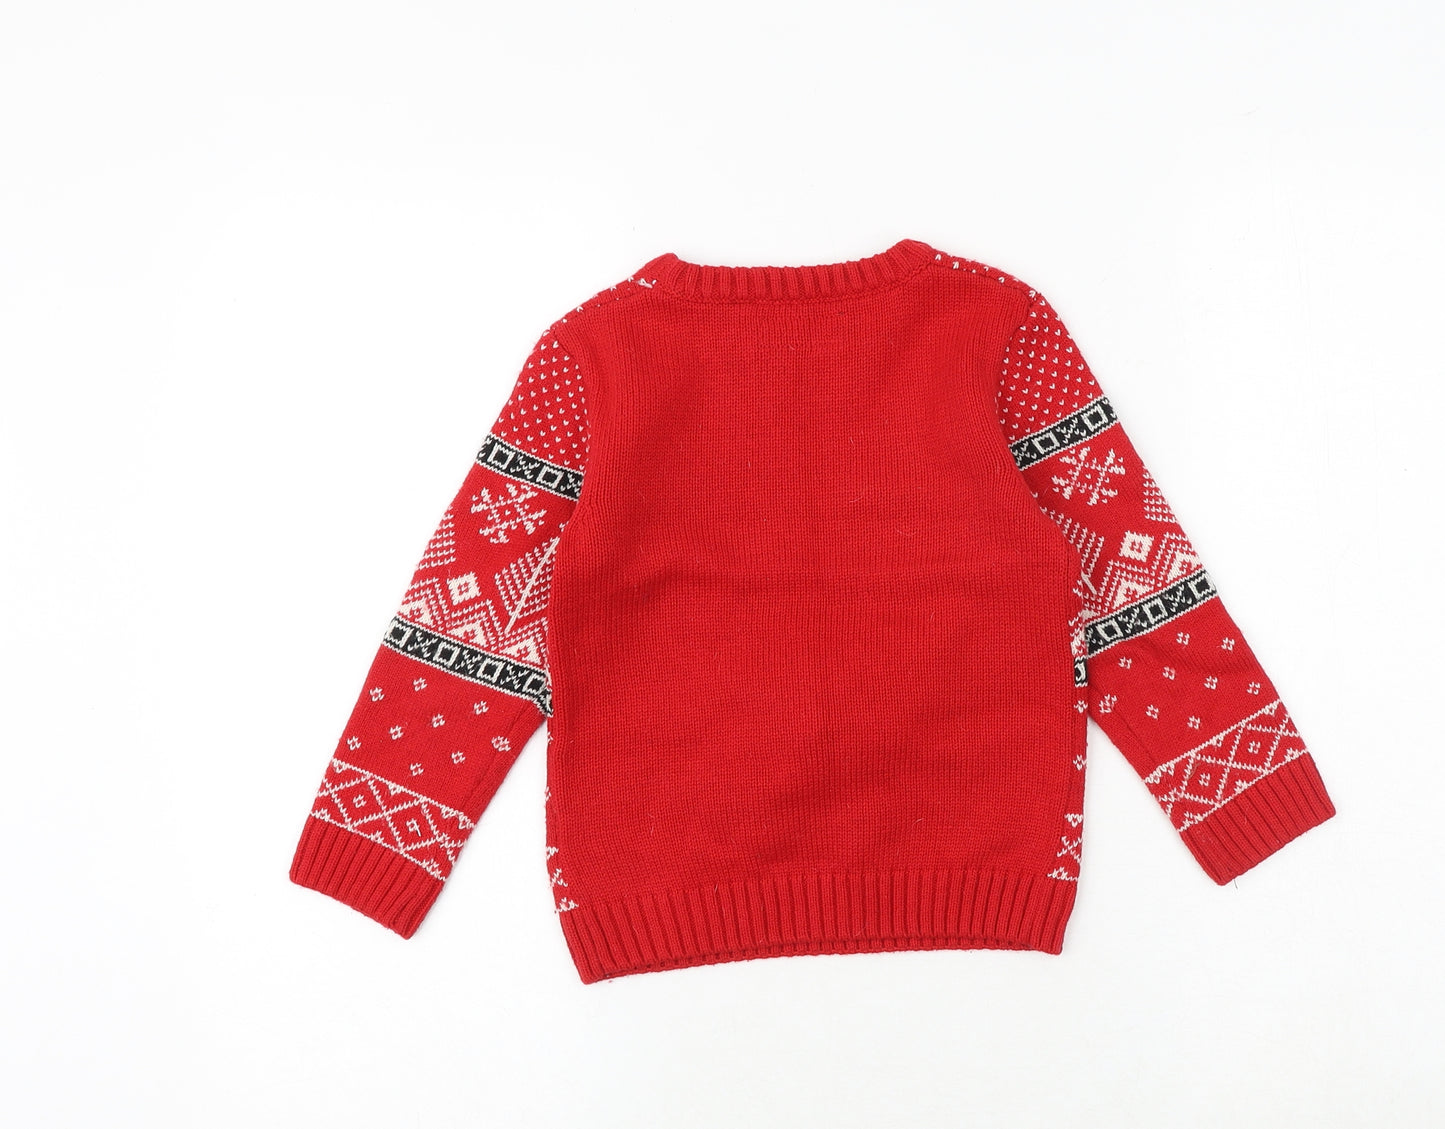 NEXT Boys Red Round Neck Geometric Acrylic Pullover Jumper Size 4 Years Pullover - Christmas Reindeer